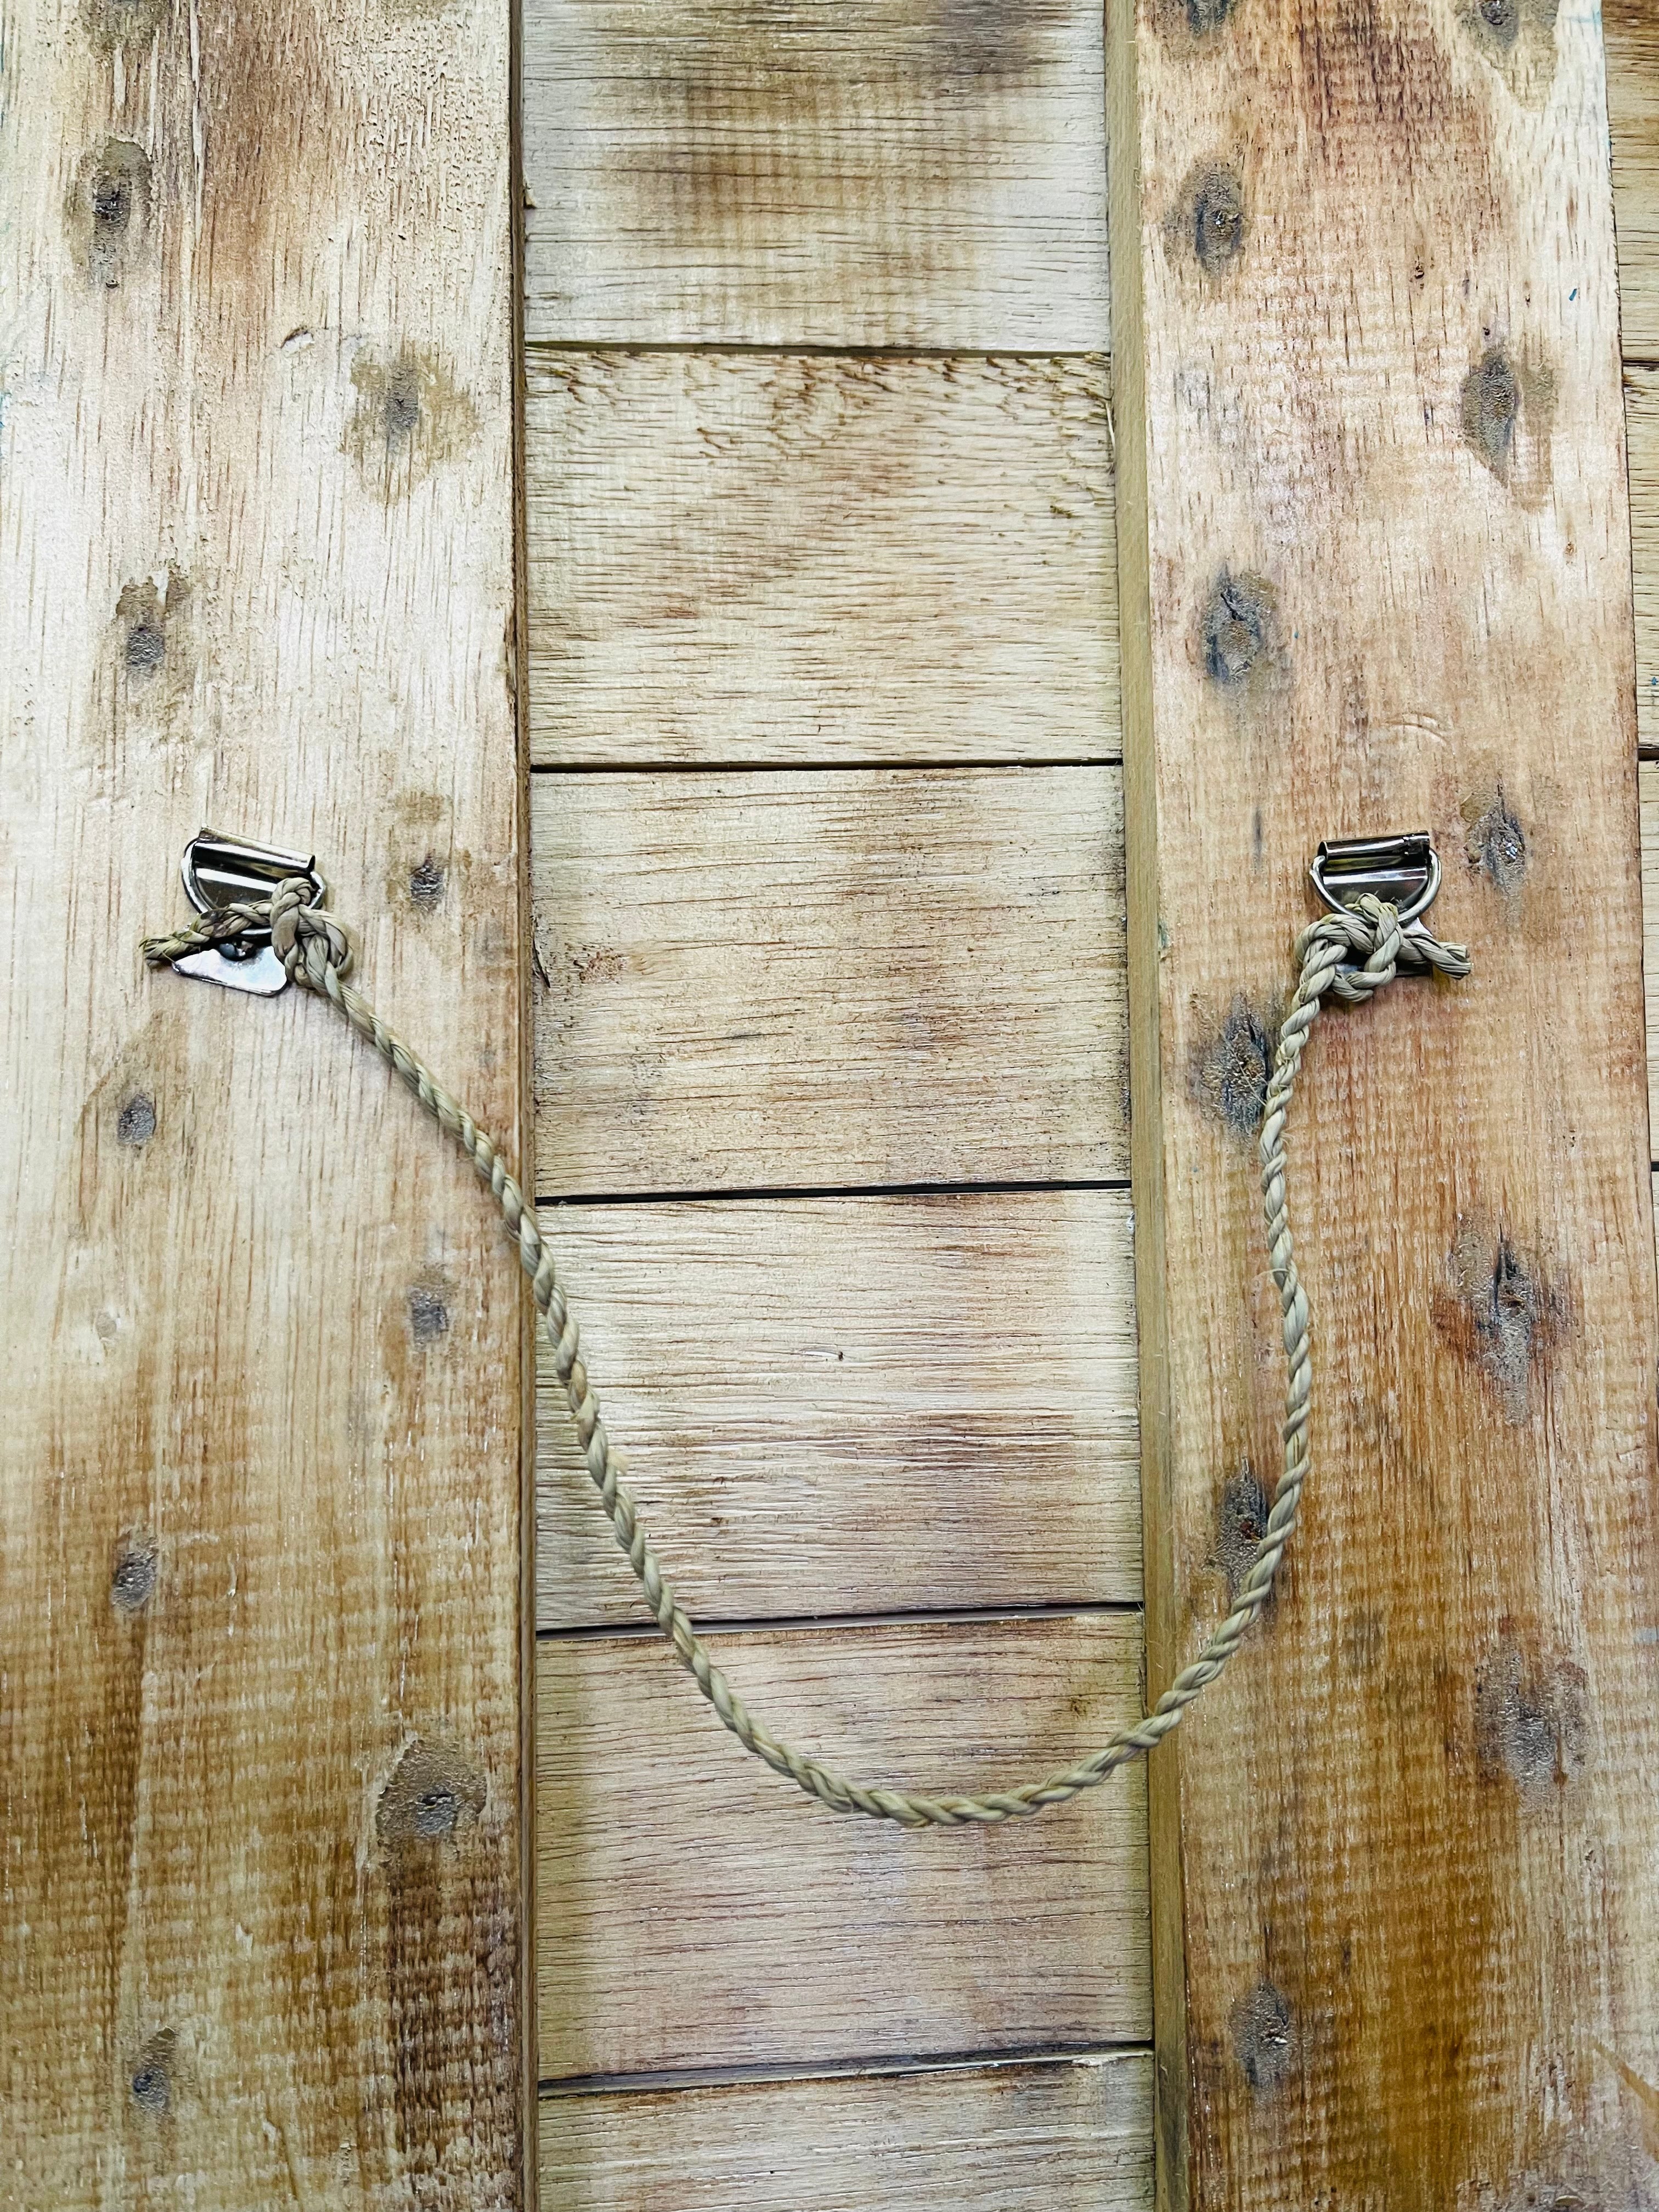 back view of wooden sign with rope hook attached